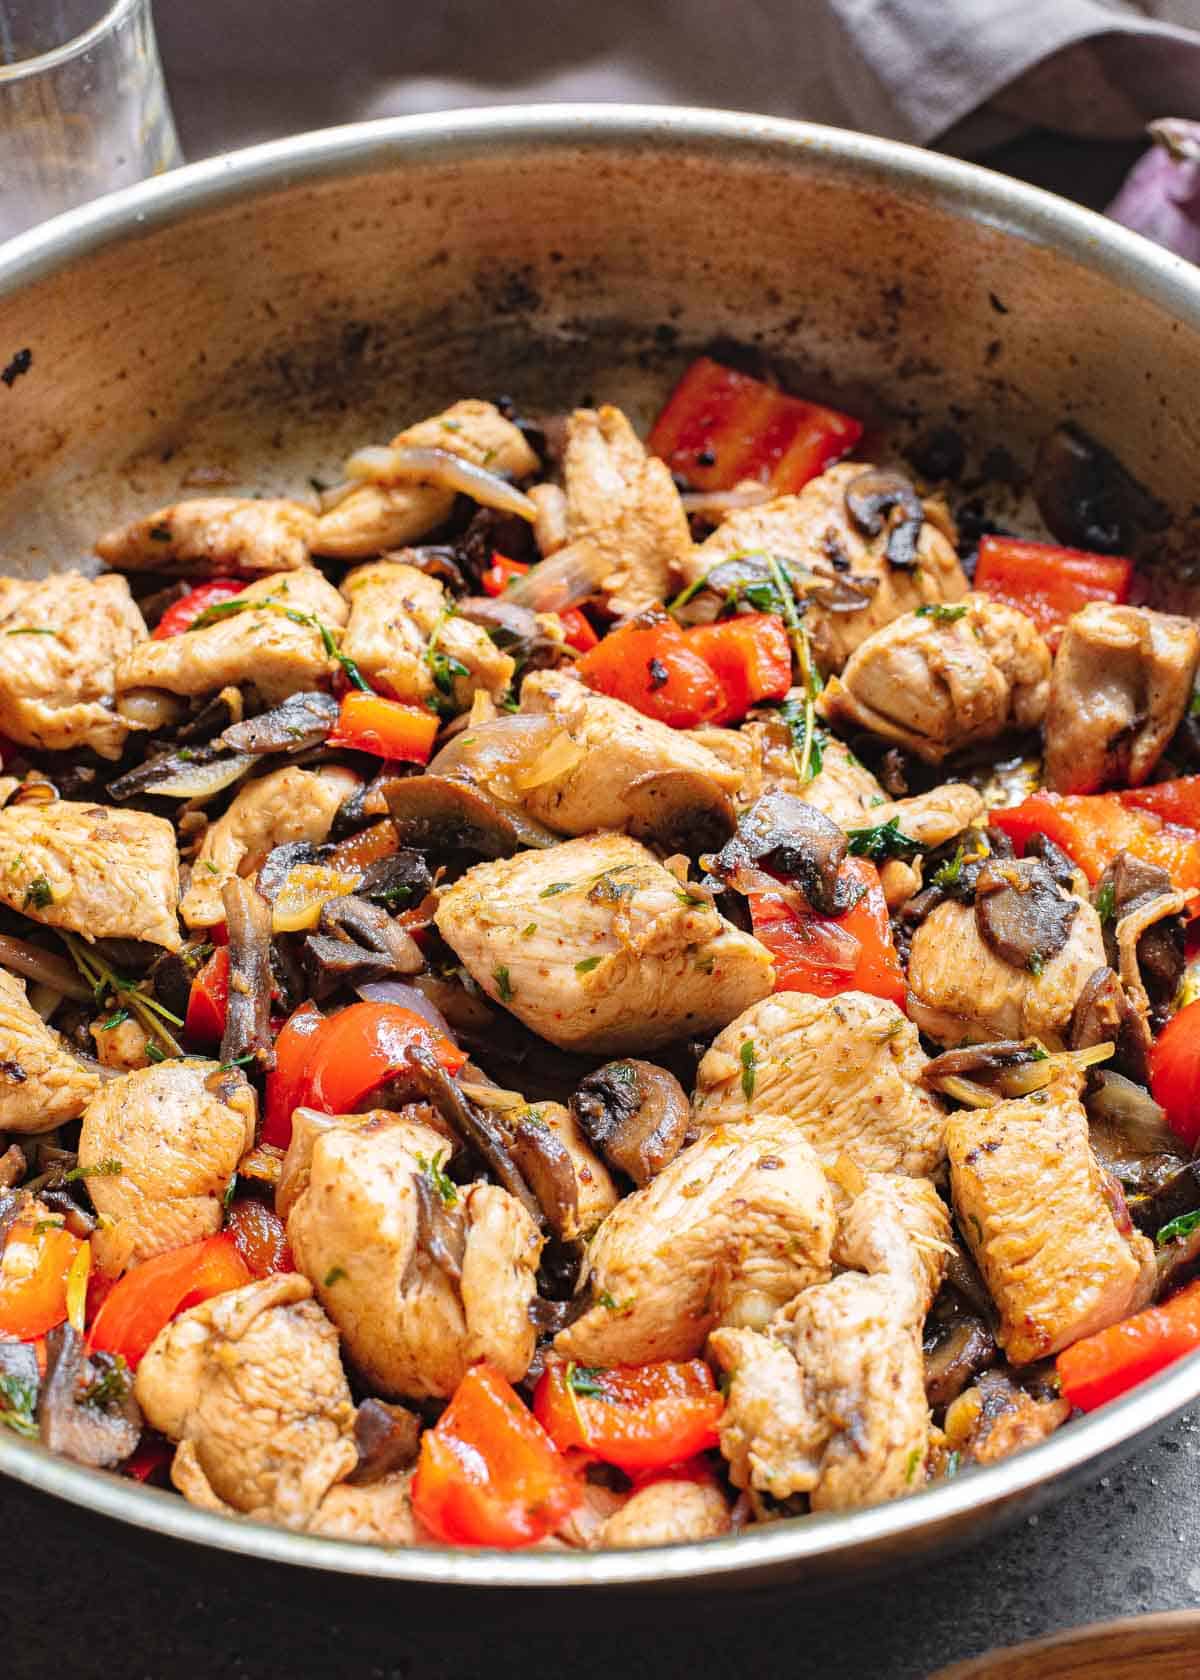 Garlic chicken bites in a stainless steel skillet with red peppers, mushrooms and onions.